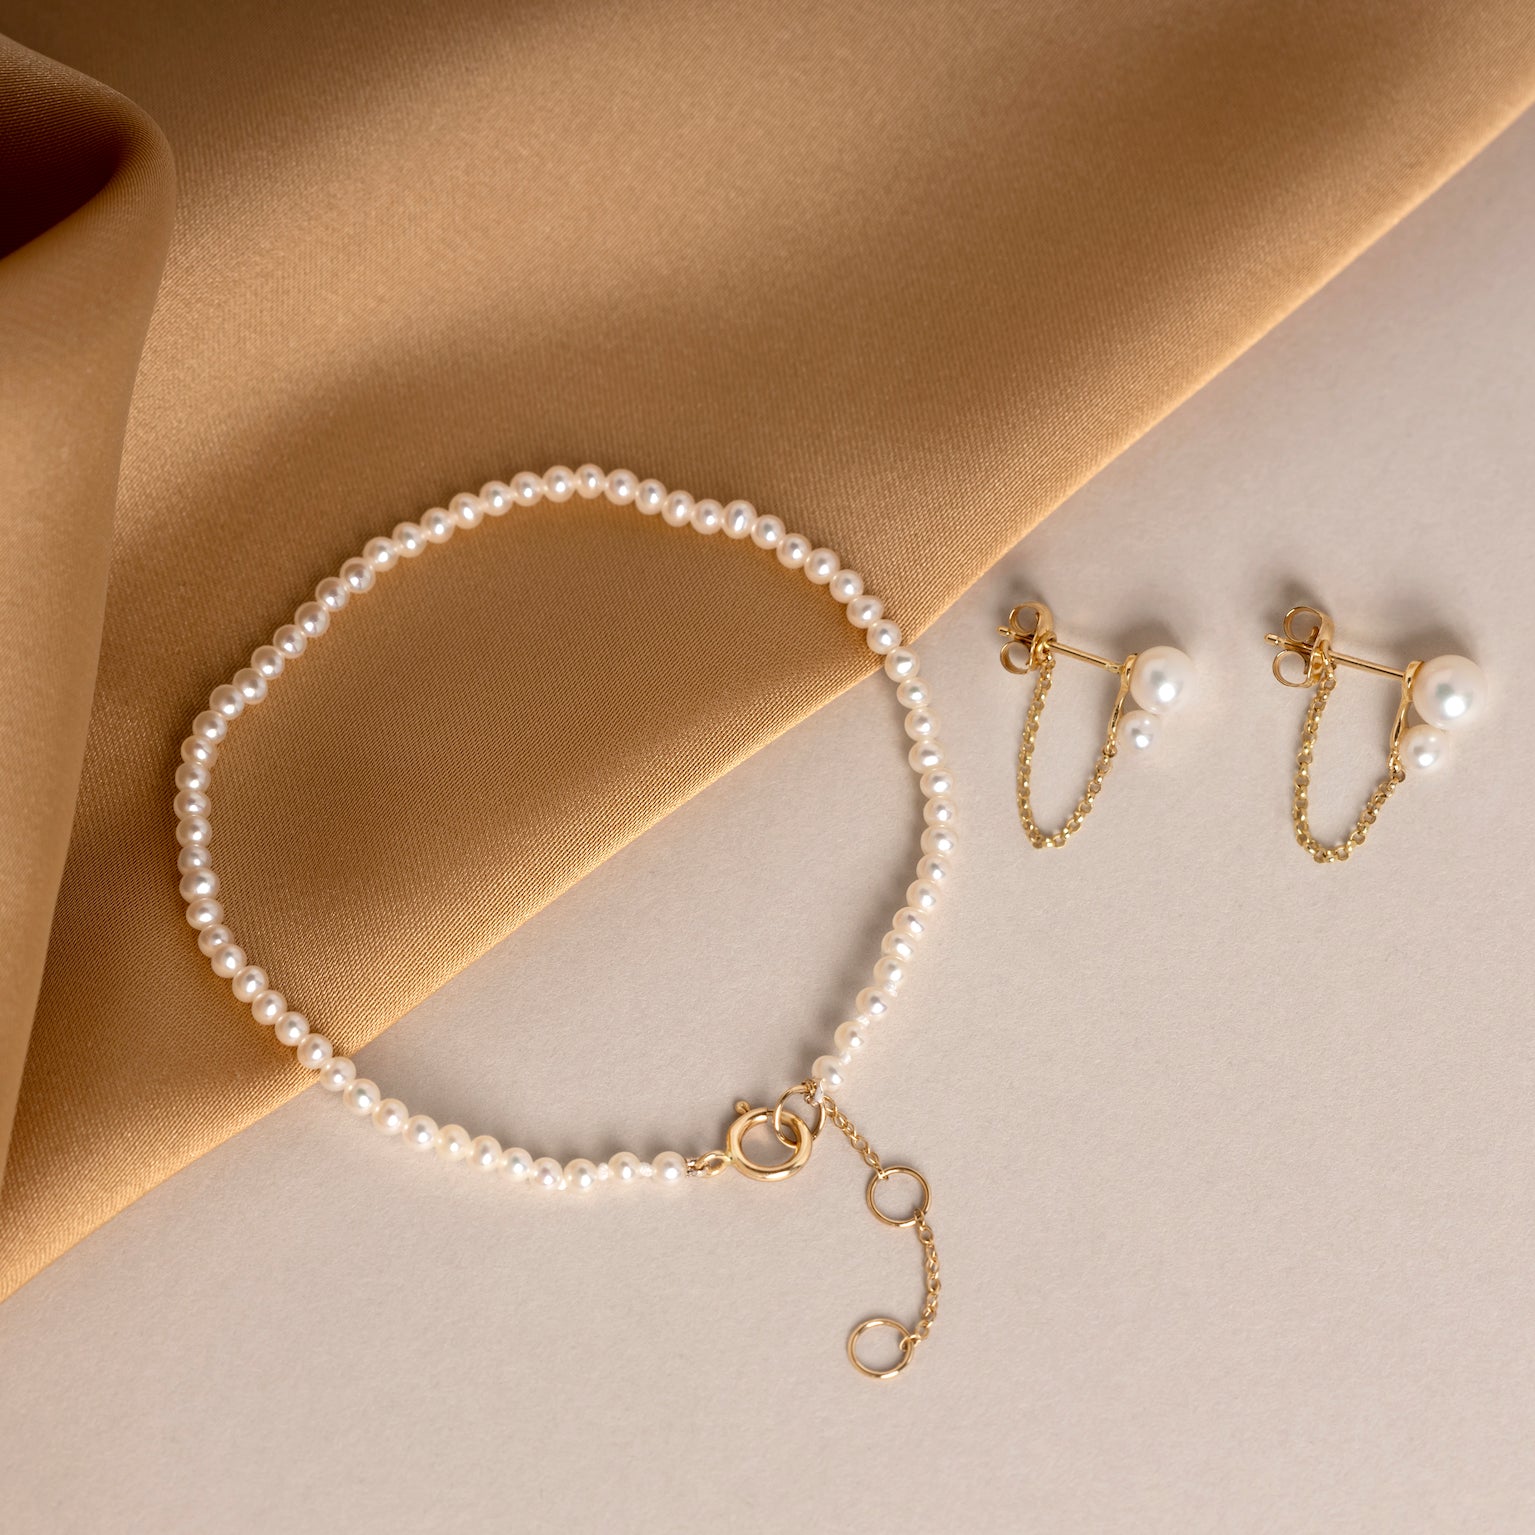 Freshwater pearl and solid gold bracelet and earrings